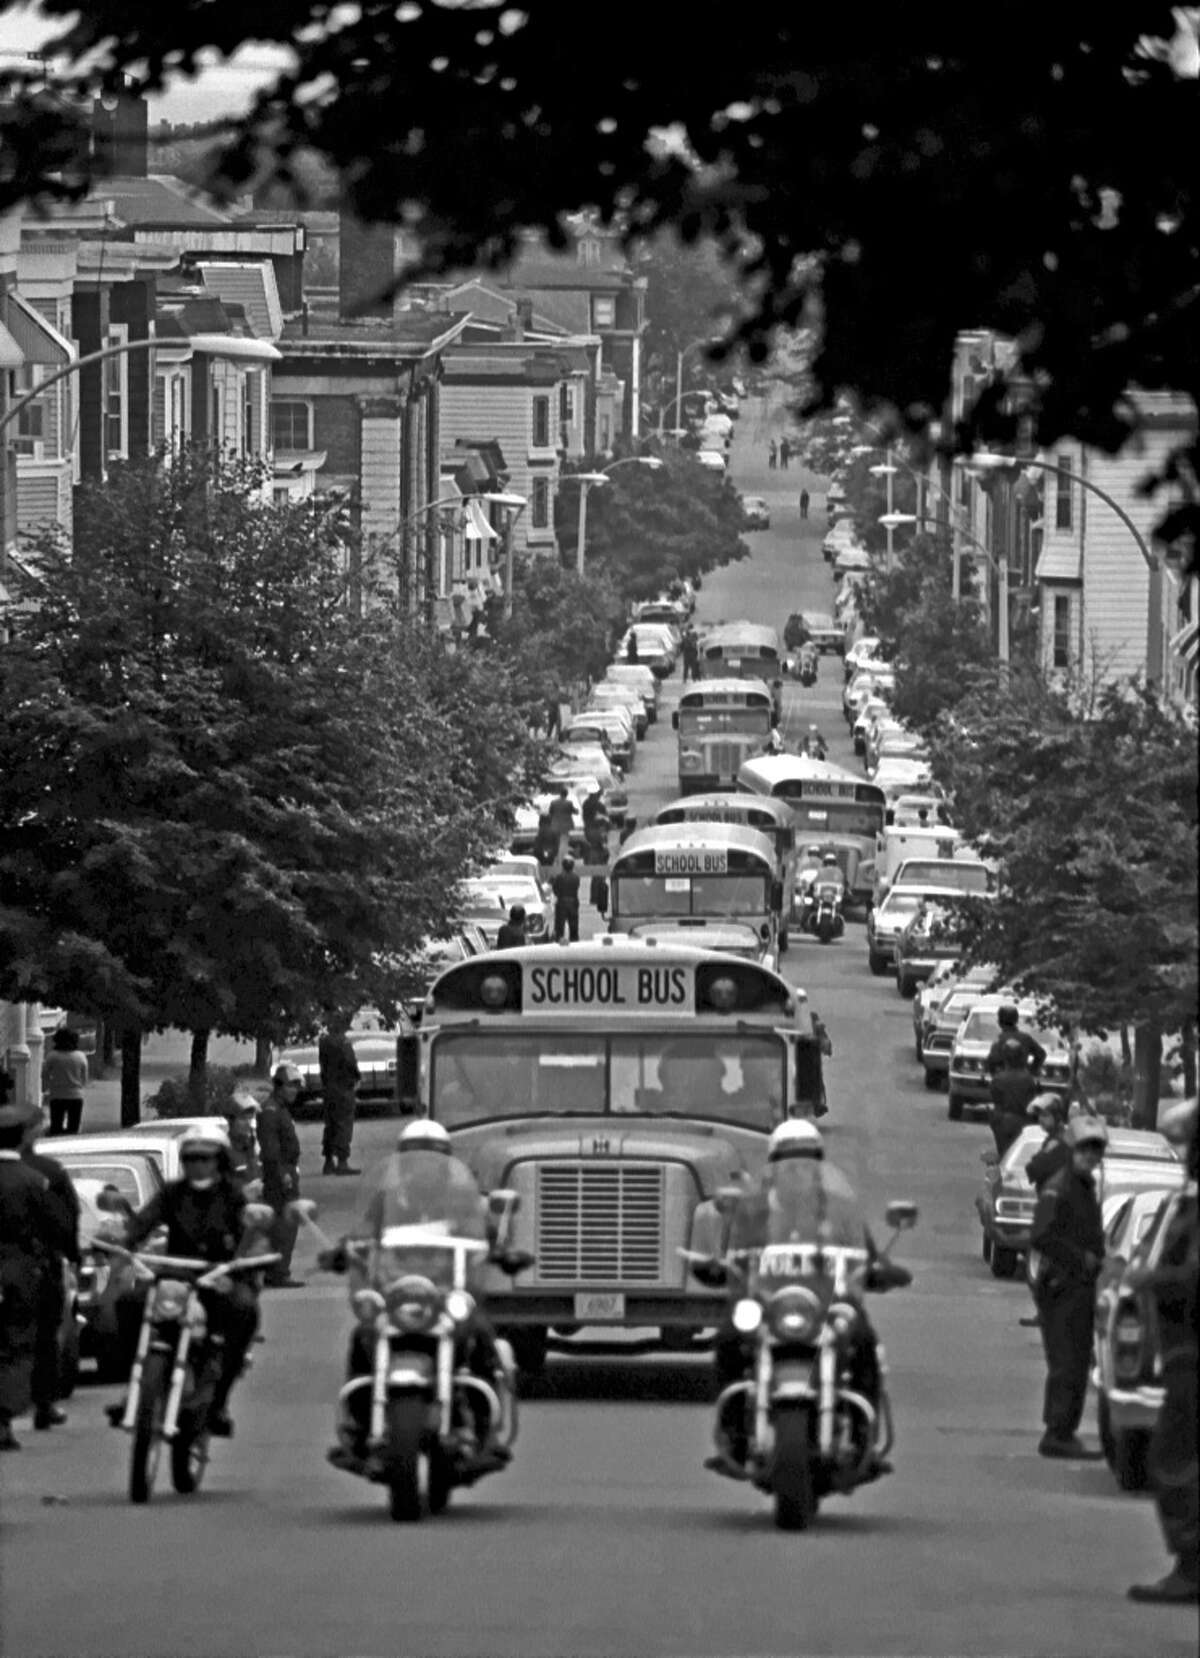 Accompanied by motorcycle-mounted police, school buses carrying African American students arrive at formerly all-white South Boston High School on September 12, 1974, the first day of federal court-ordered busing to achieve racial balance in the city's de facto segregated schools. Today, 70 years after the landmark Brown v. Board of Education Supreme Court decision, New York is the most segregated state in the nation for Black students and second-most segregated for Latino students, following only California, a June 2021 analysis from the UCLA Civil Rights Project shows.